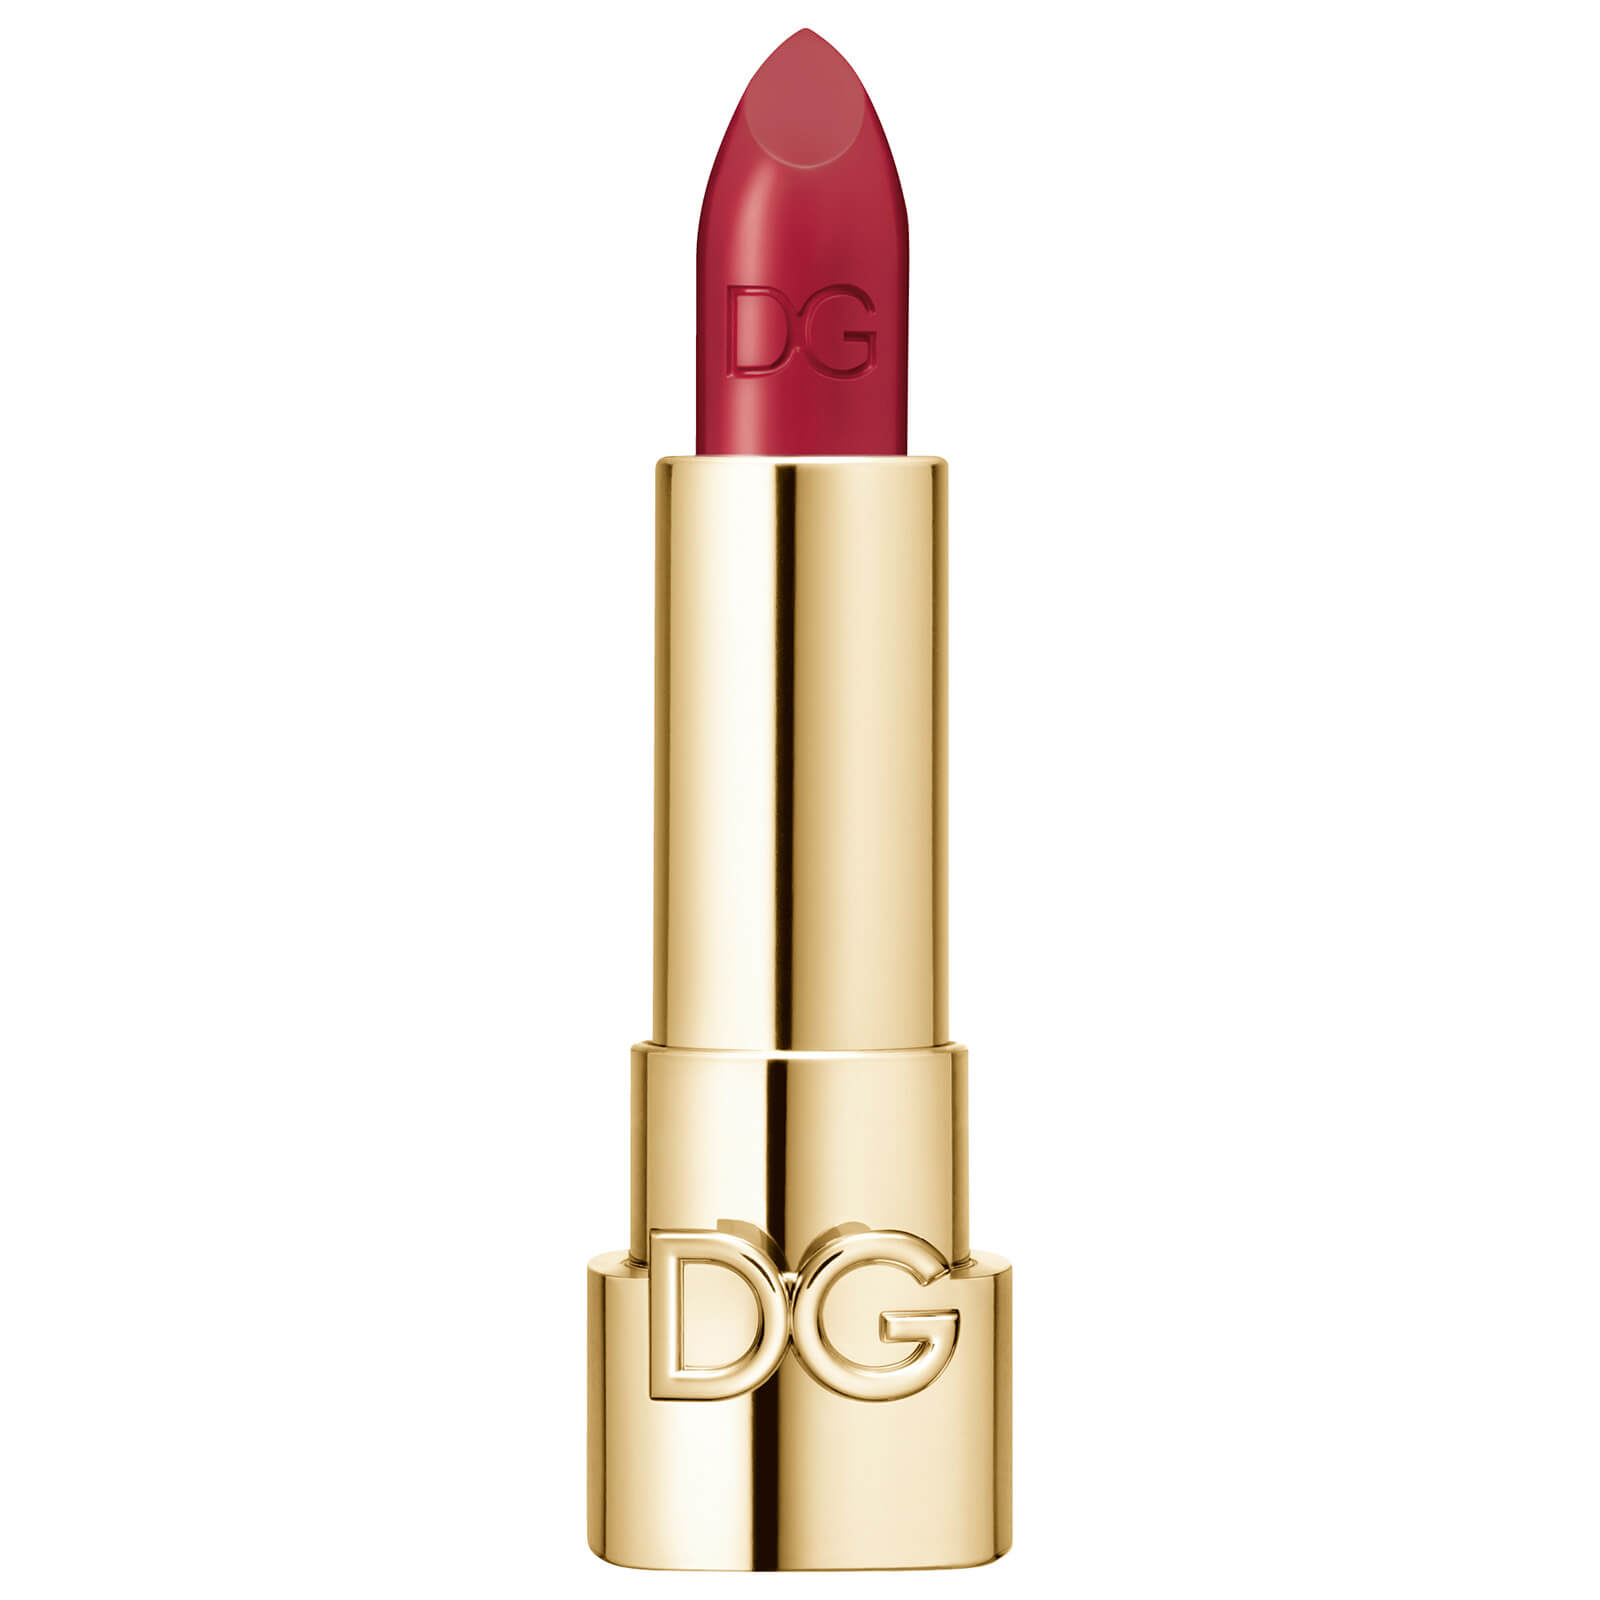 Dolce&Gabbana The Only One Lipstick 1.7g (No Cap) (Various Shades) - 640 #DGAmore